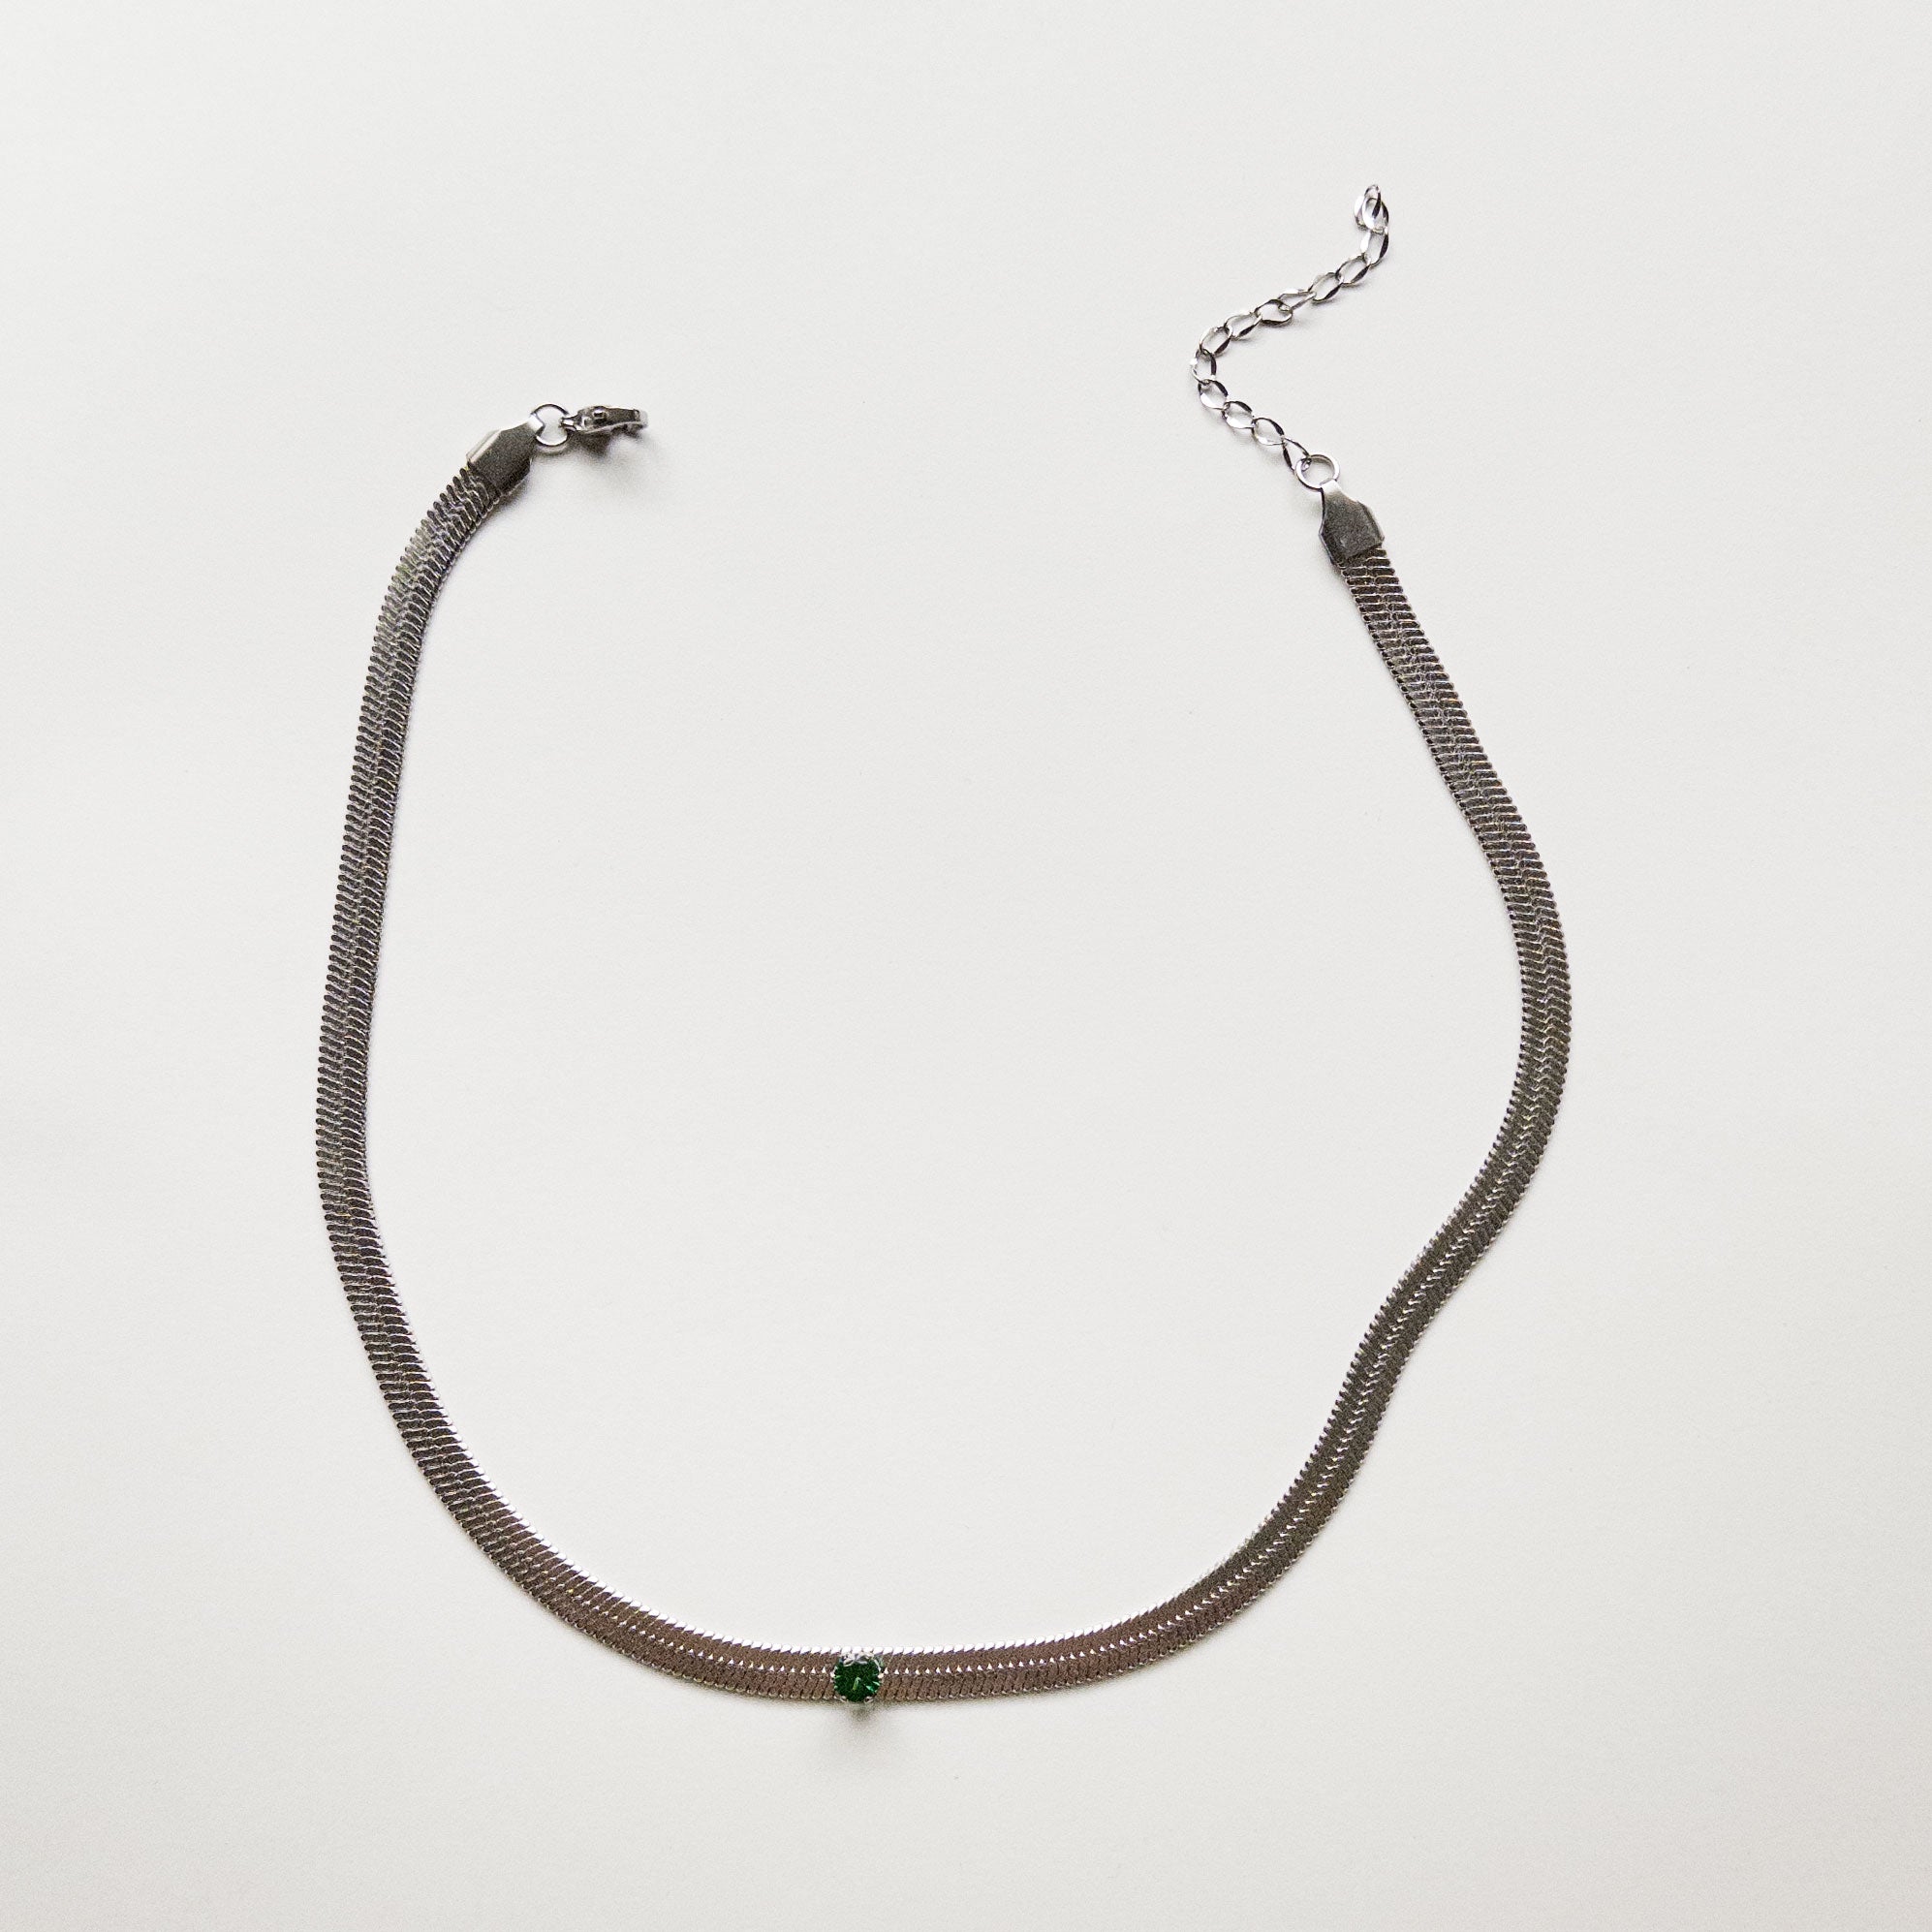 Stainless steel silver colored snake chain choker/necklace featuring a sage green cubic zirconia gem in the center. Can be dress up or down. Perfect for layering and everyday wear. 